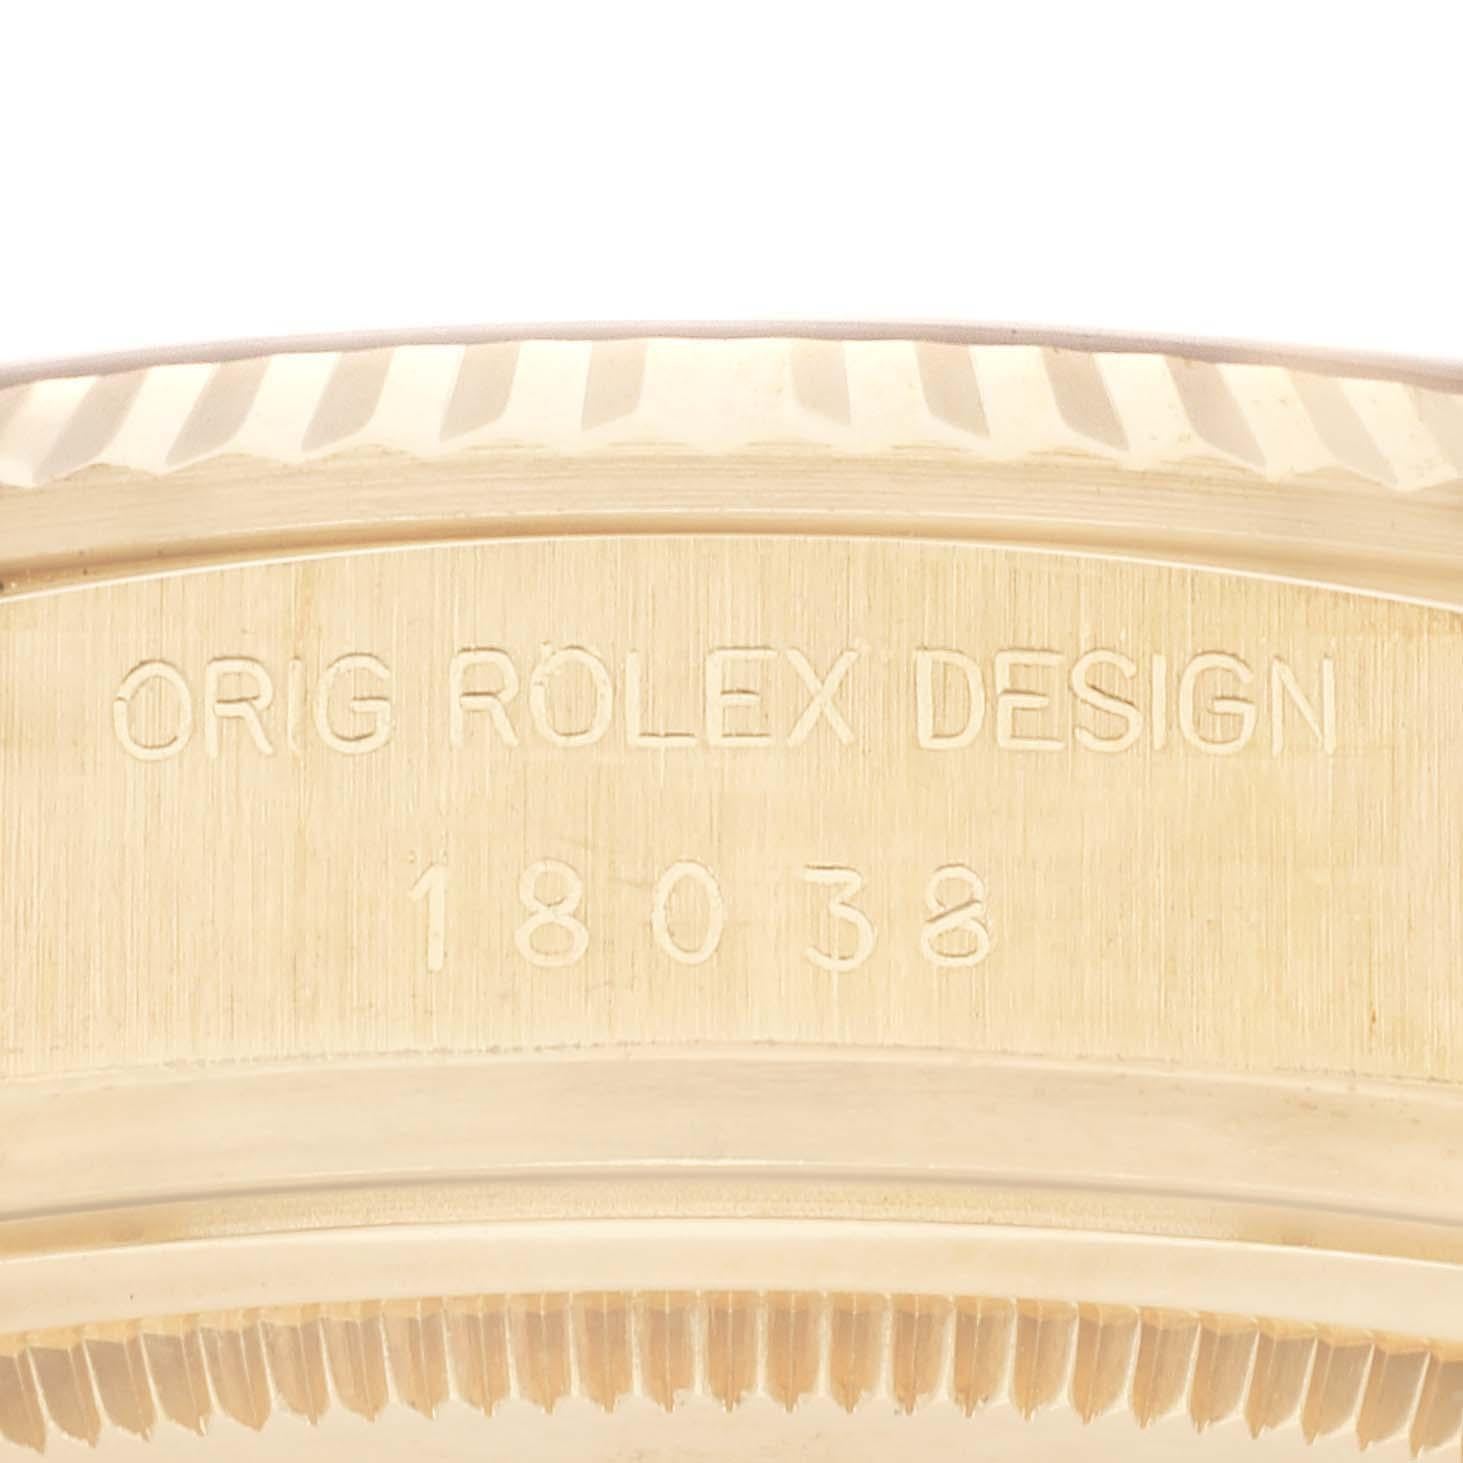 Rolex President Day-Date Yellow Gold Champagne Dial Mens Watch 18038 In Excellent Condition In Atlanta, GA